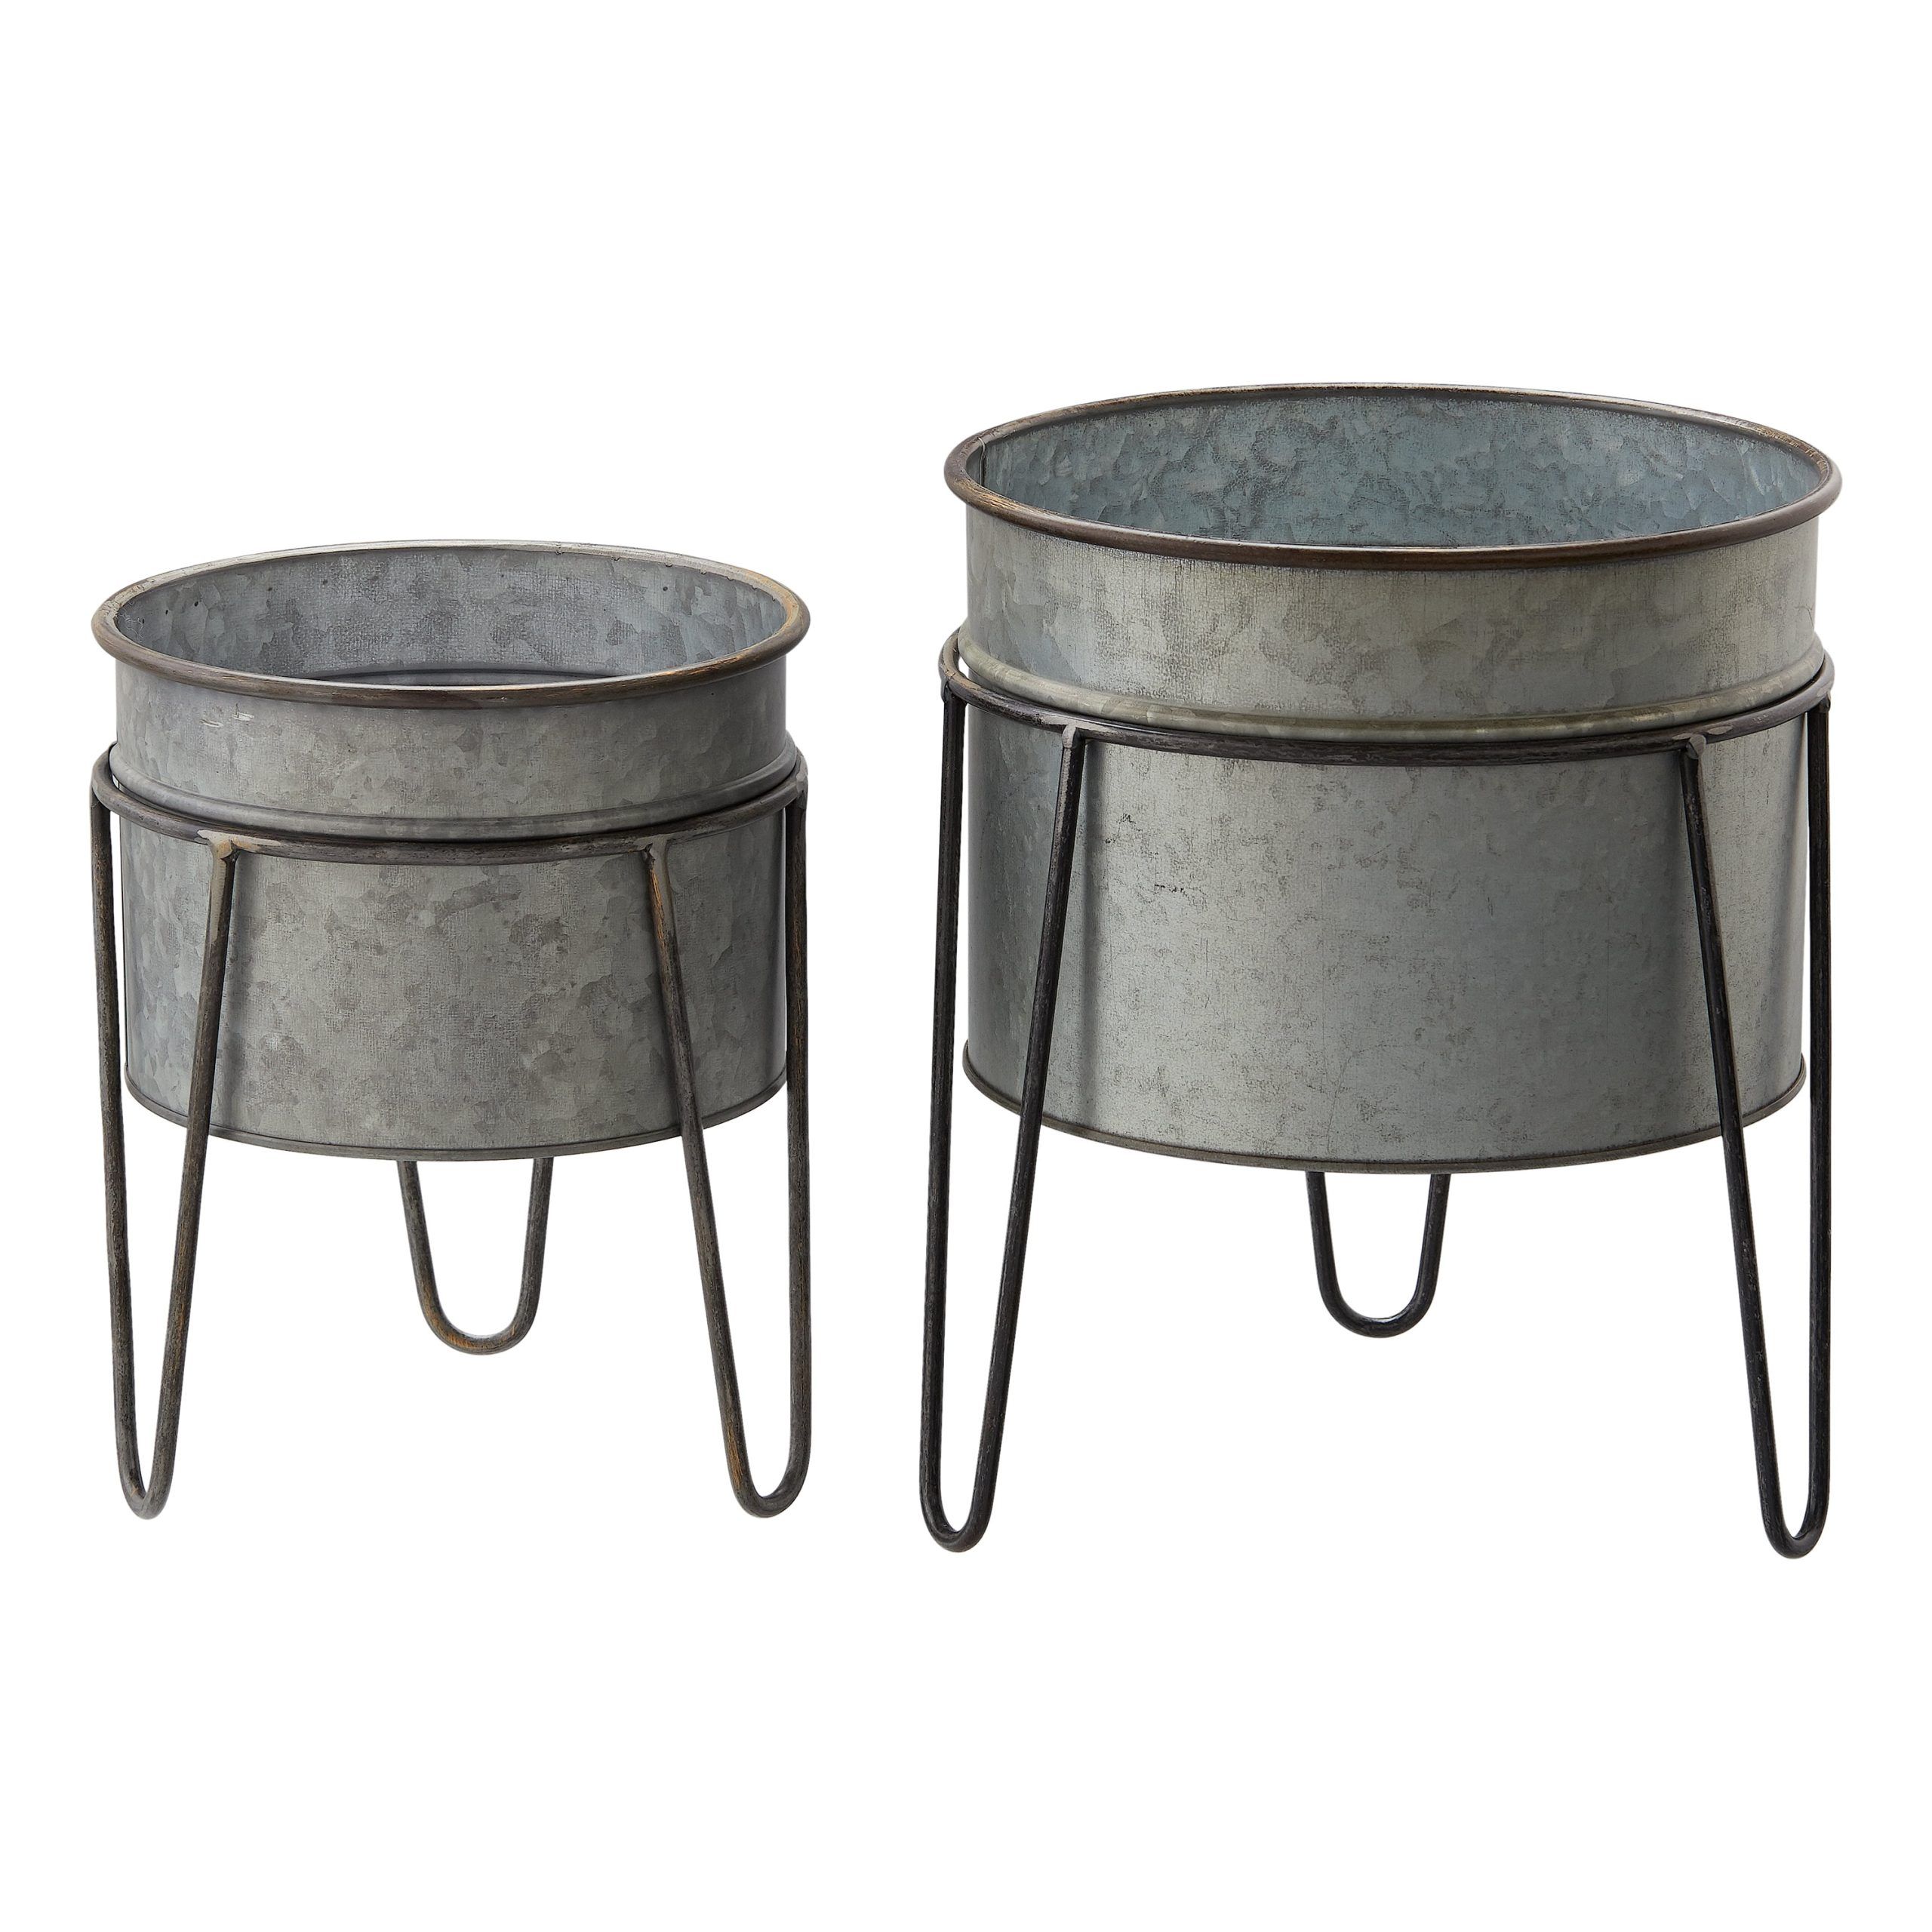 Galvanized Plant Stands In Current Better Homes & Gardens Galvanized Metal Planter With Stand, Set Of 2 –  Walmart (View 3 of 10)